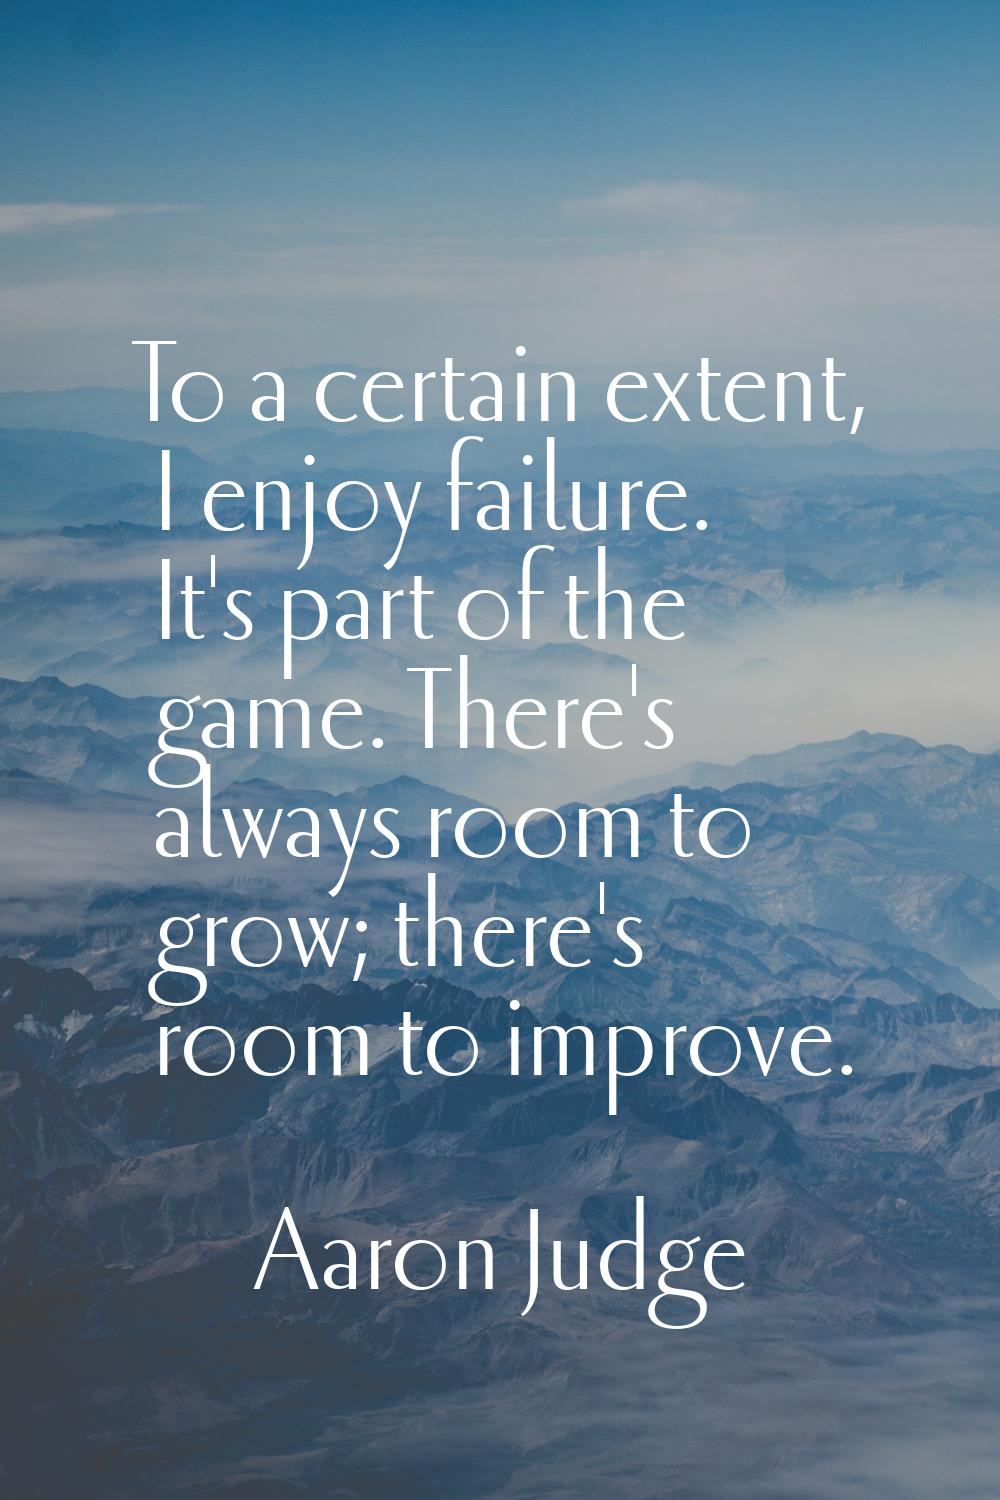 To a certain extent, I enjoy failure. It's part of the game. There's always room to grow; there's r